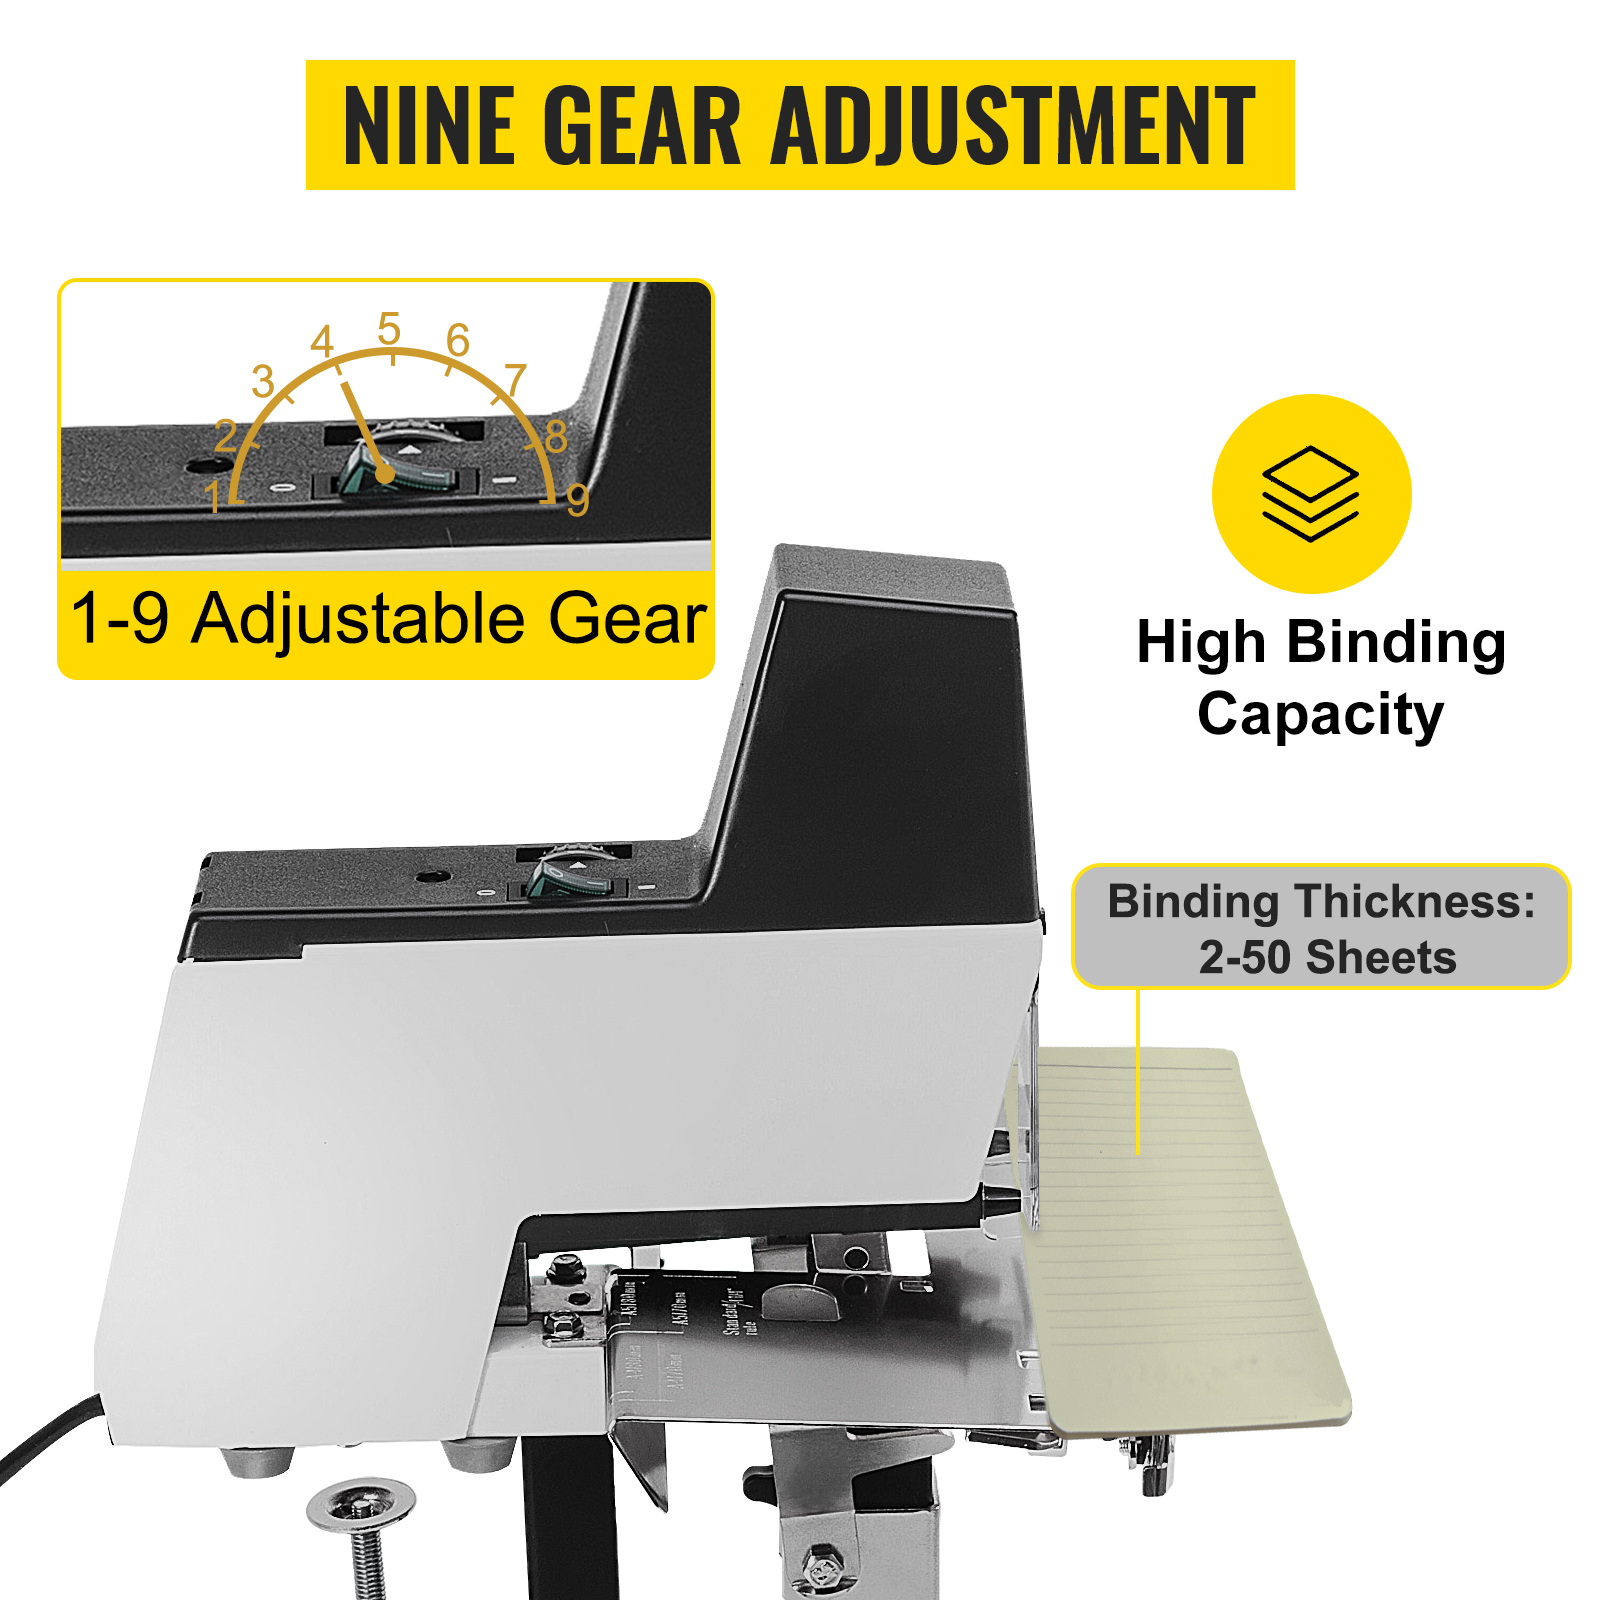 Details about   106 Auto Electric Stapler and Saddle Binder Book Binding Machine 2-50sheet 110V 